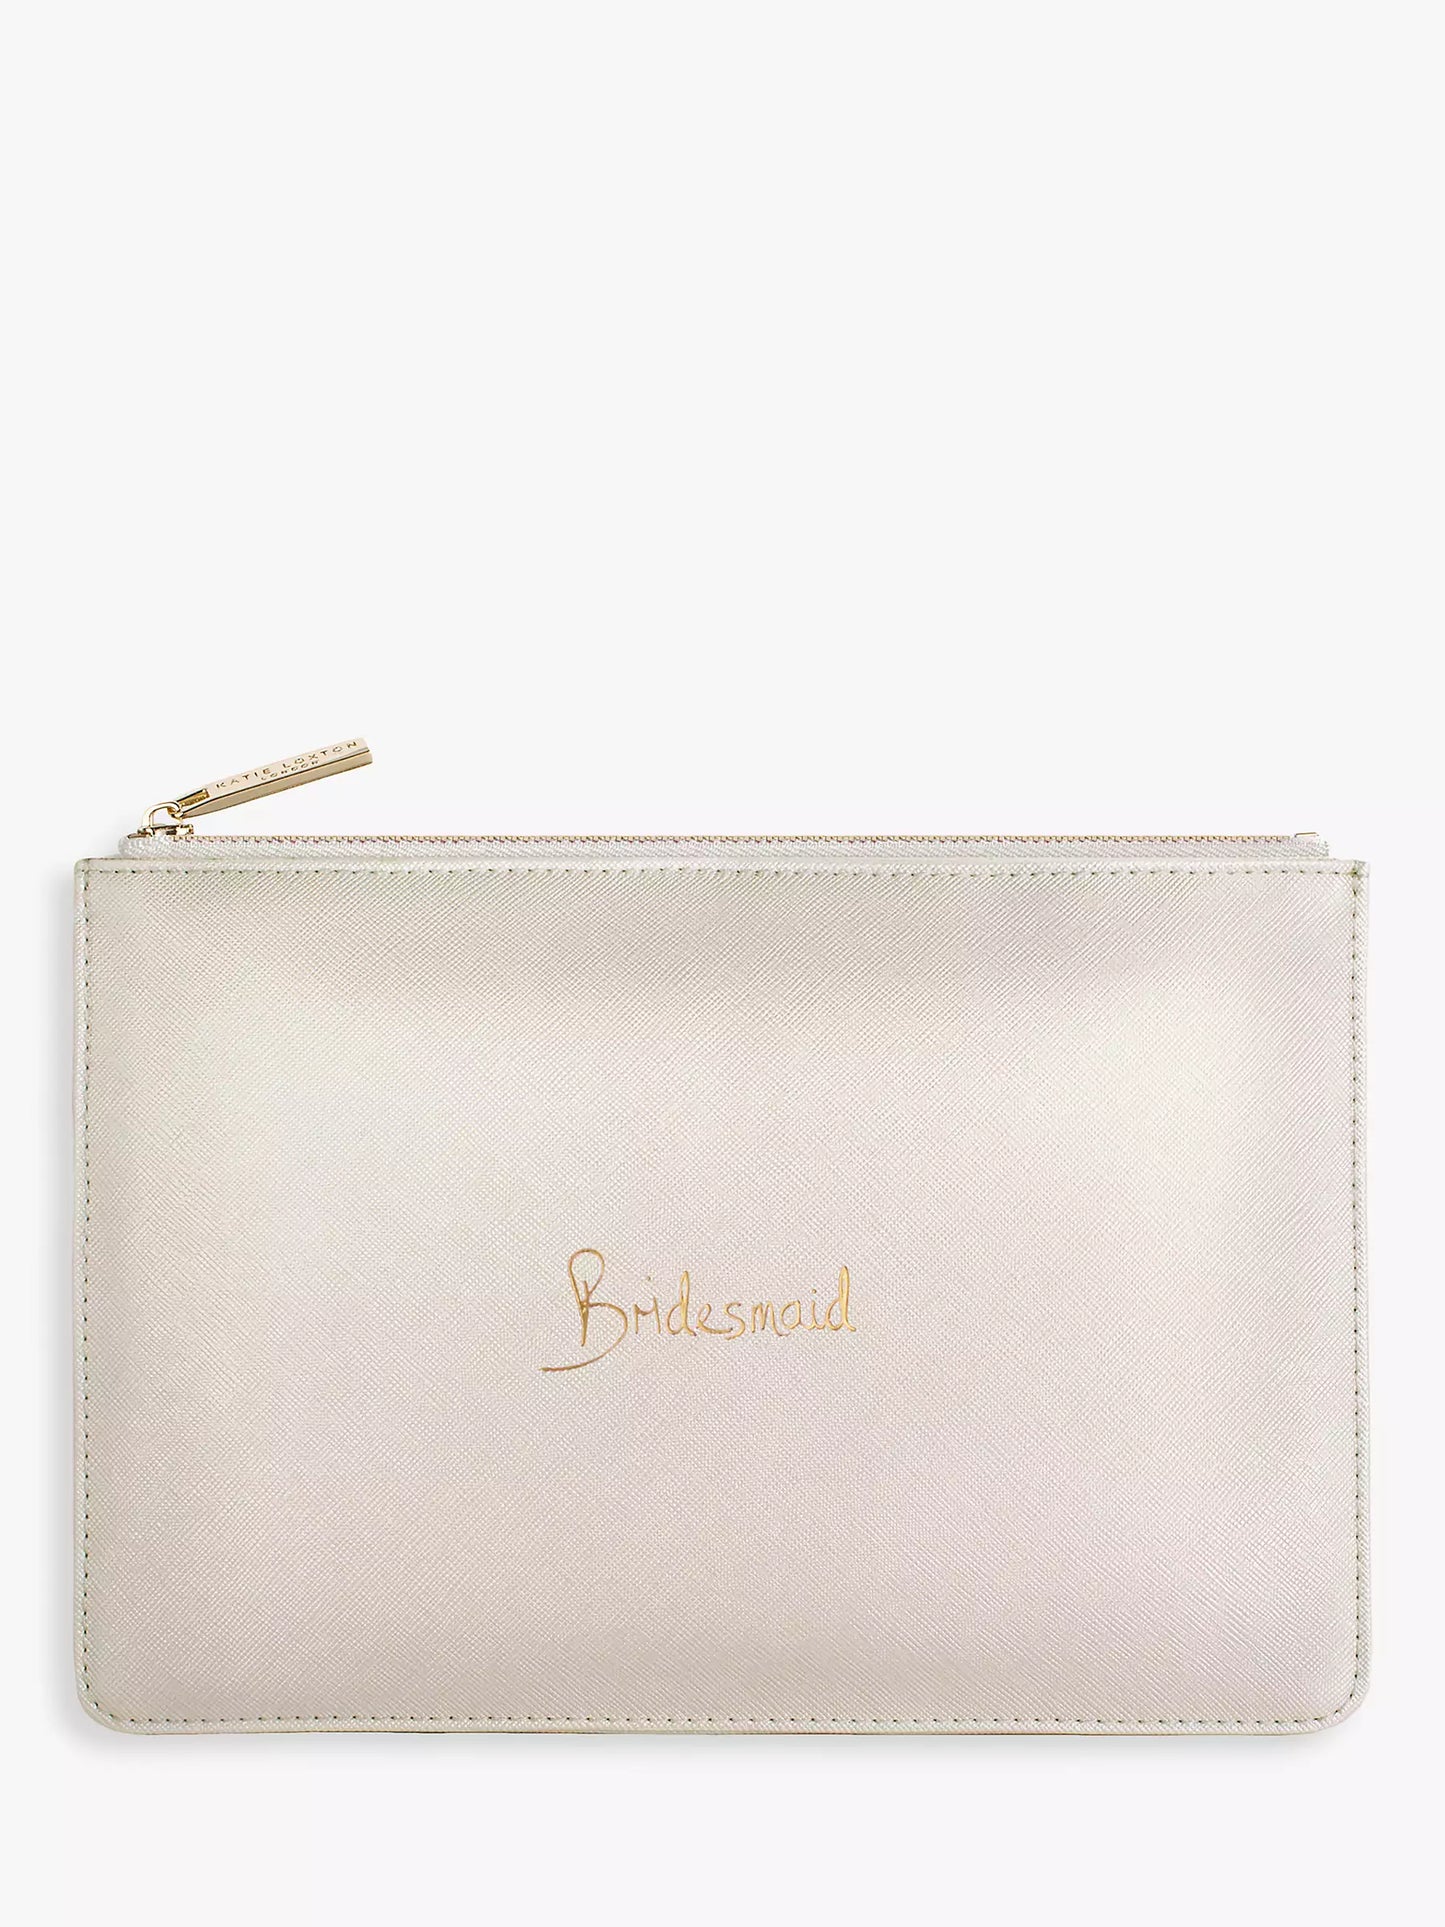 Perfect Pouch - Wedding Bridesmaid